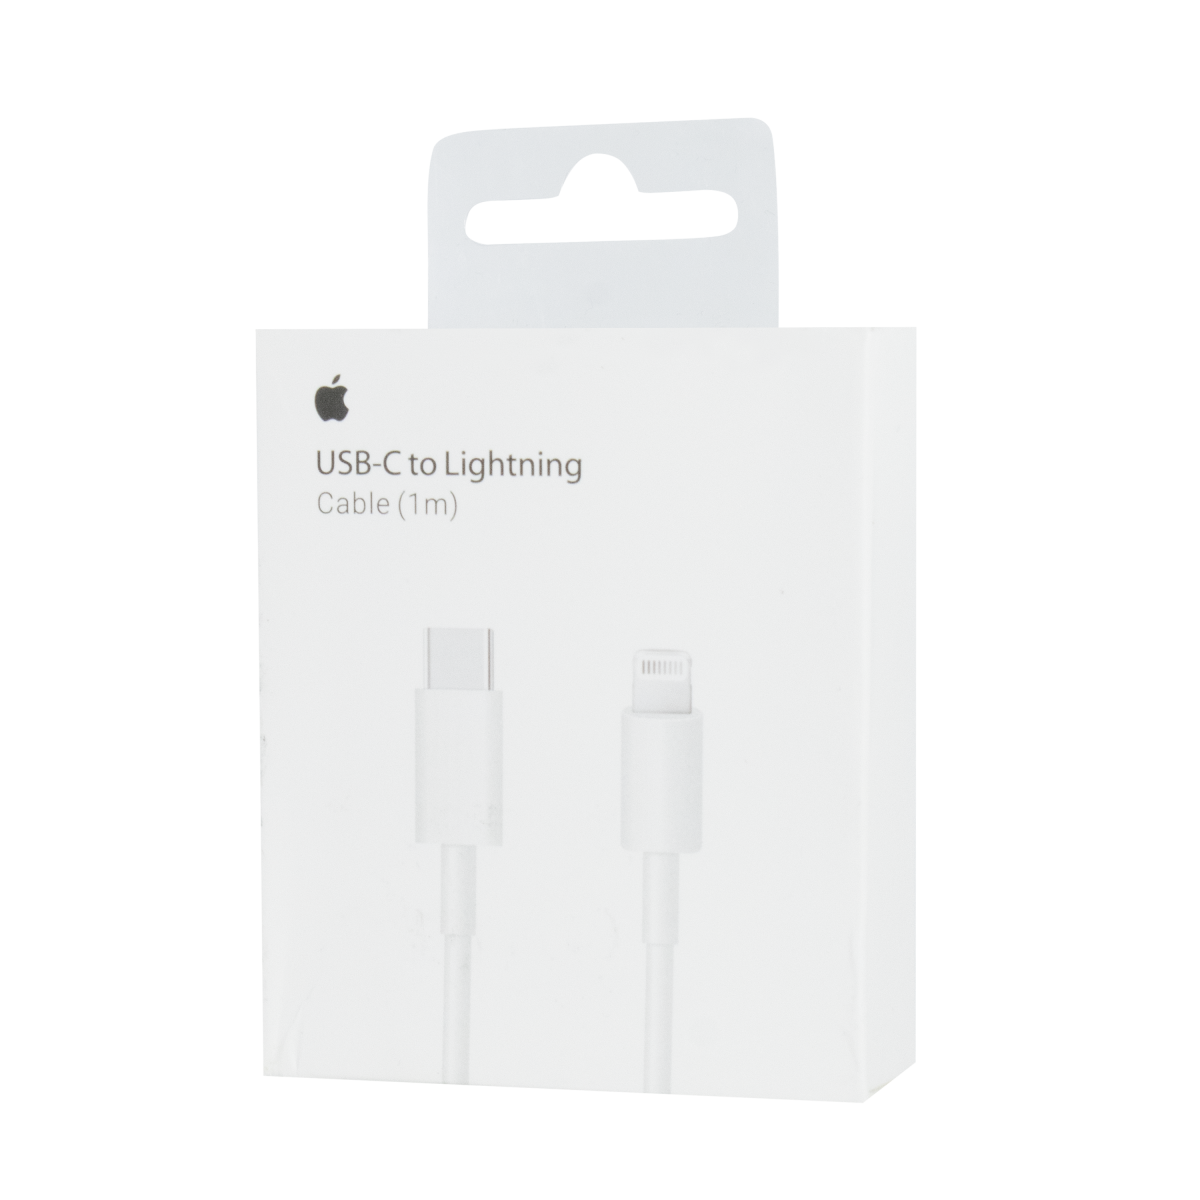 USB-C to Lightning Cable (1m) with packing